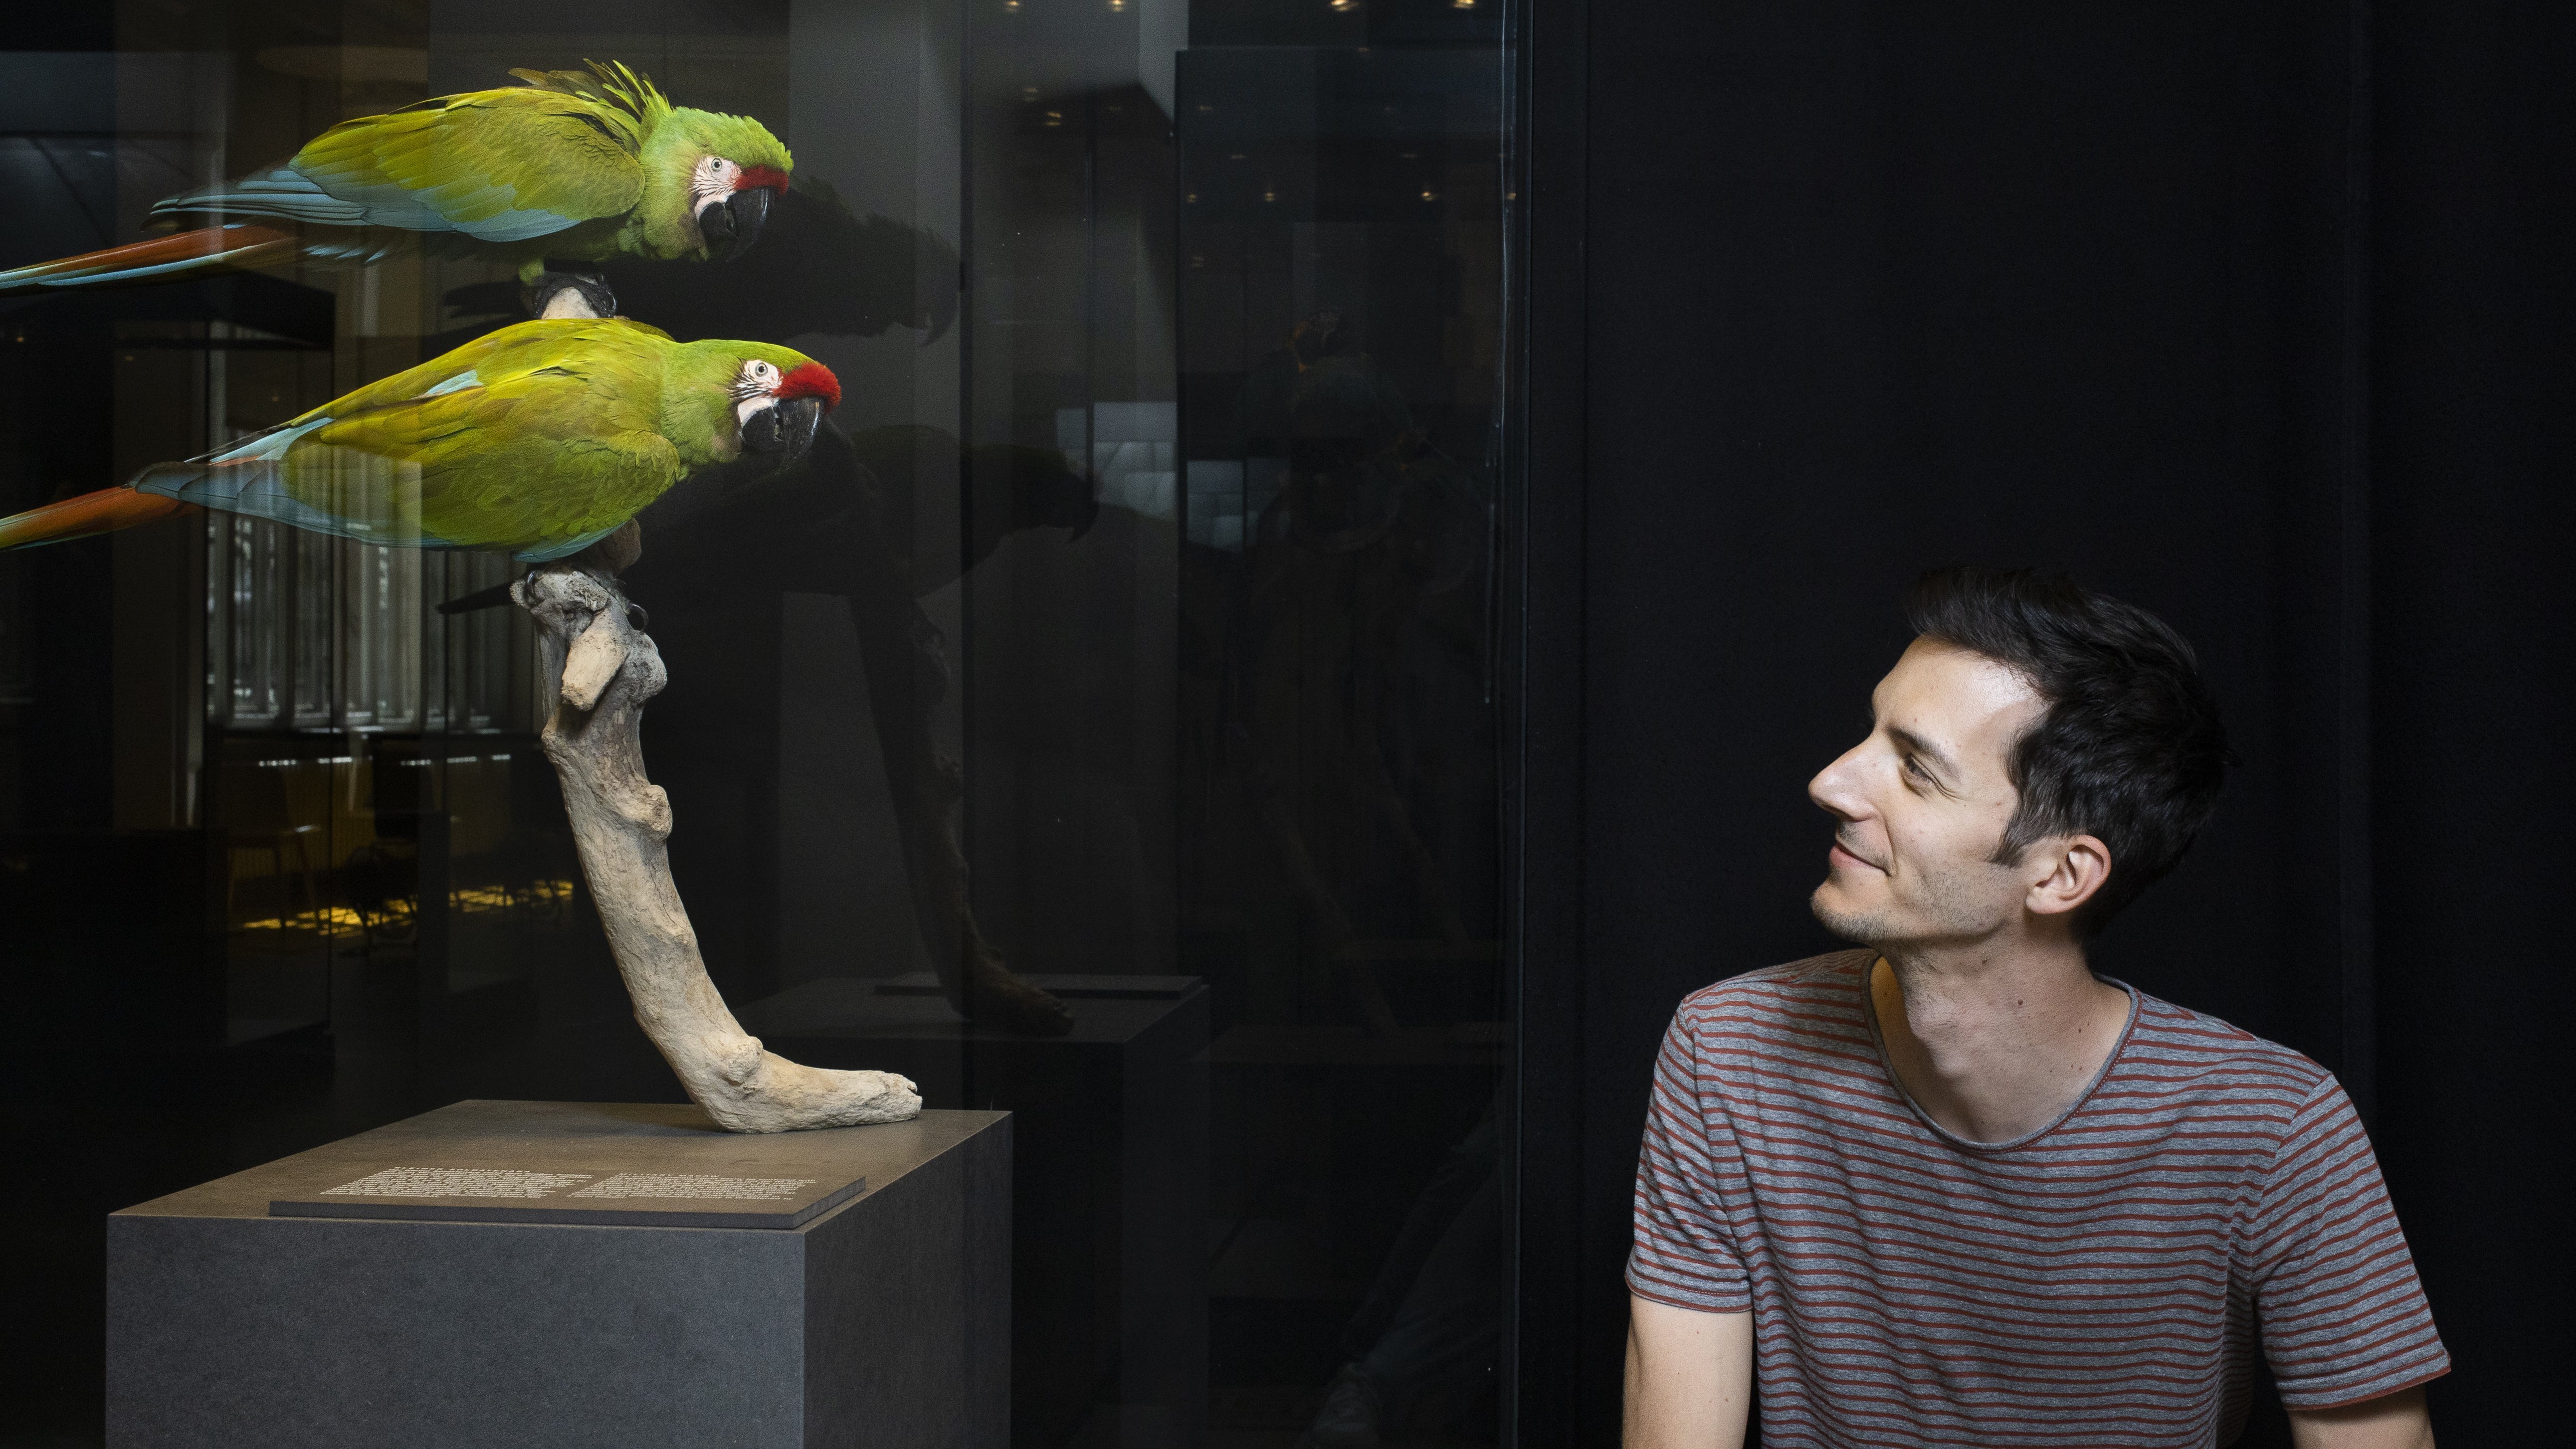 Bruno Delepelaire (on the right) next to two green parrots (on the left).